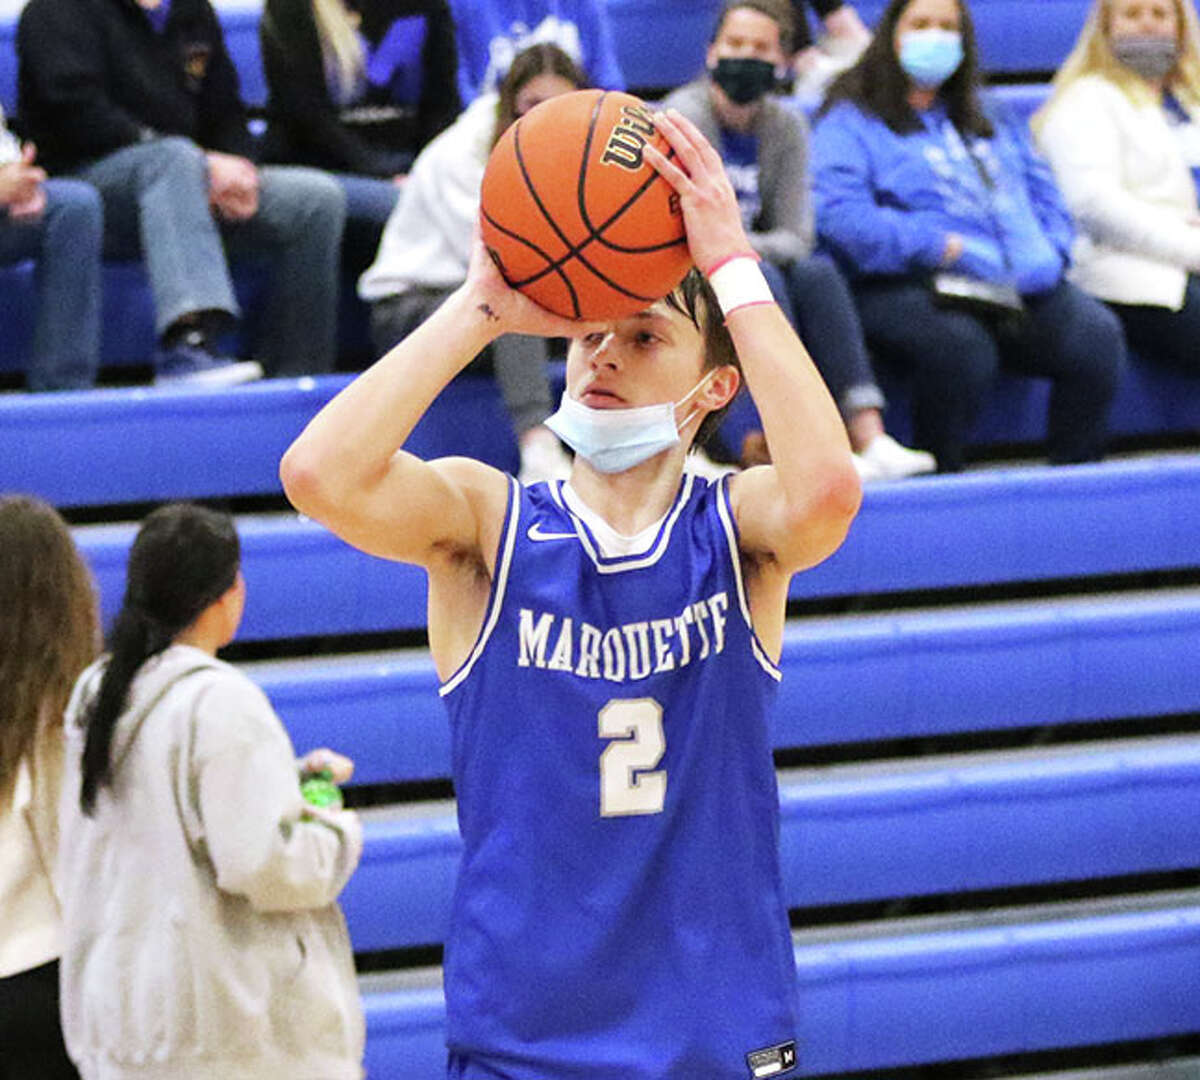 Marquette's Braden Kline takes a shot during a game at the Hoopsgiving Classic earlier this season at Roxana. The Explorers were home Saturday night and fell to Breese Mater Dei.